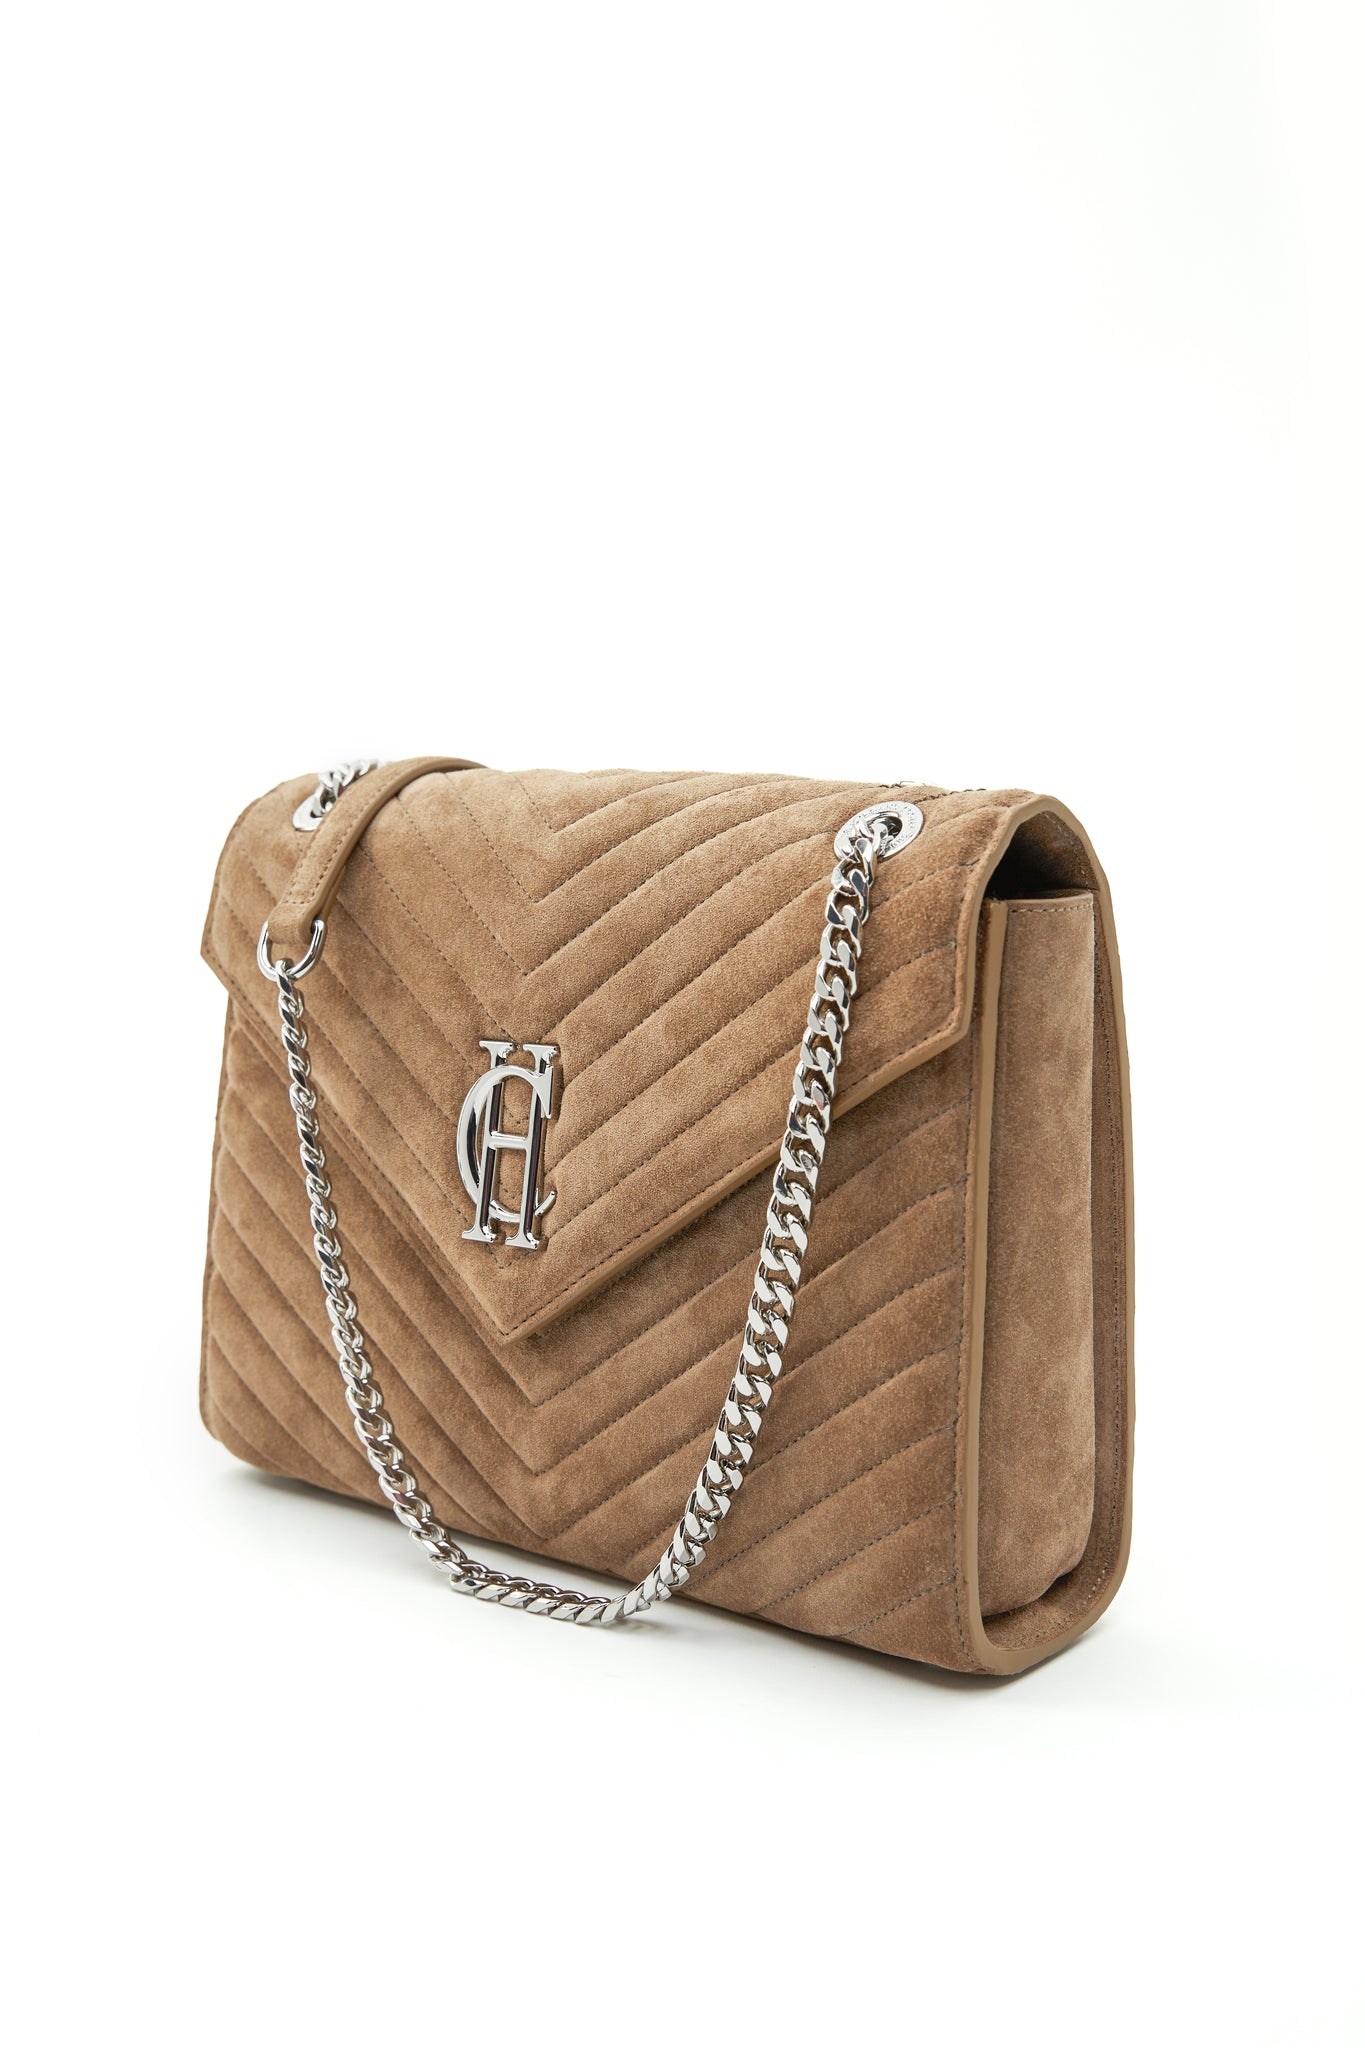 side shot of taupe suede shoulder bag with silver hardware and chain